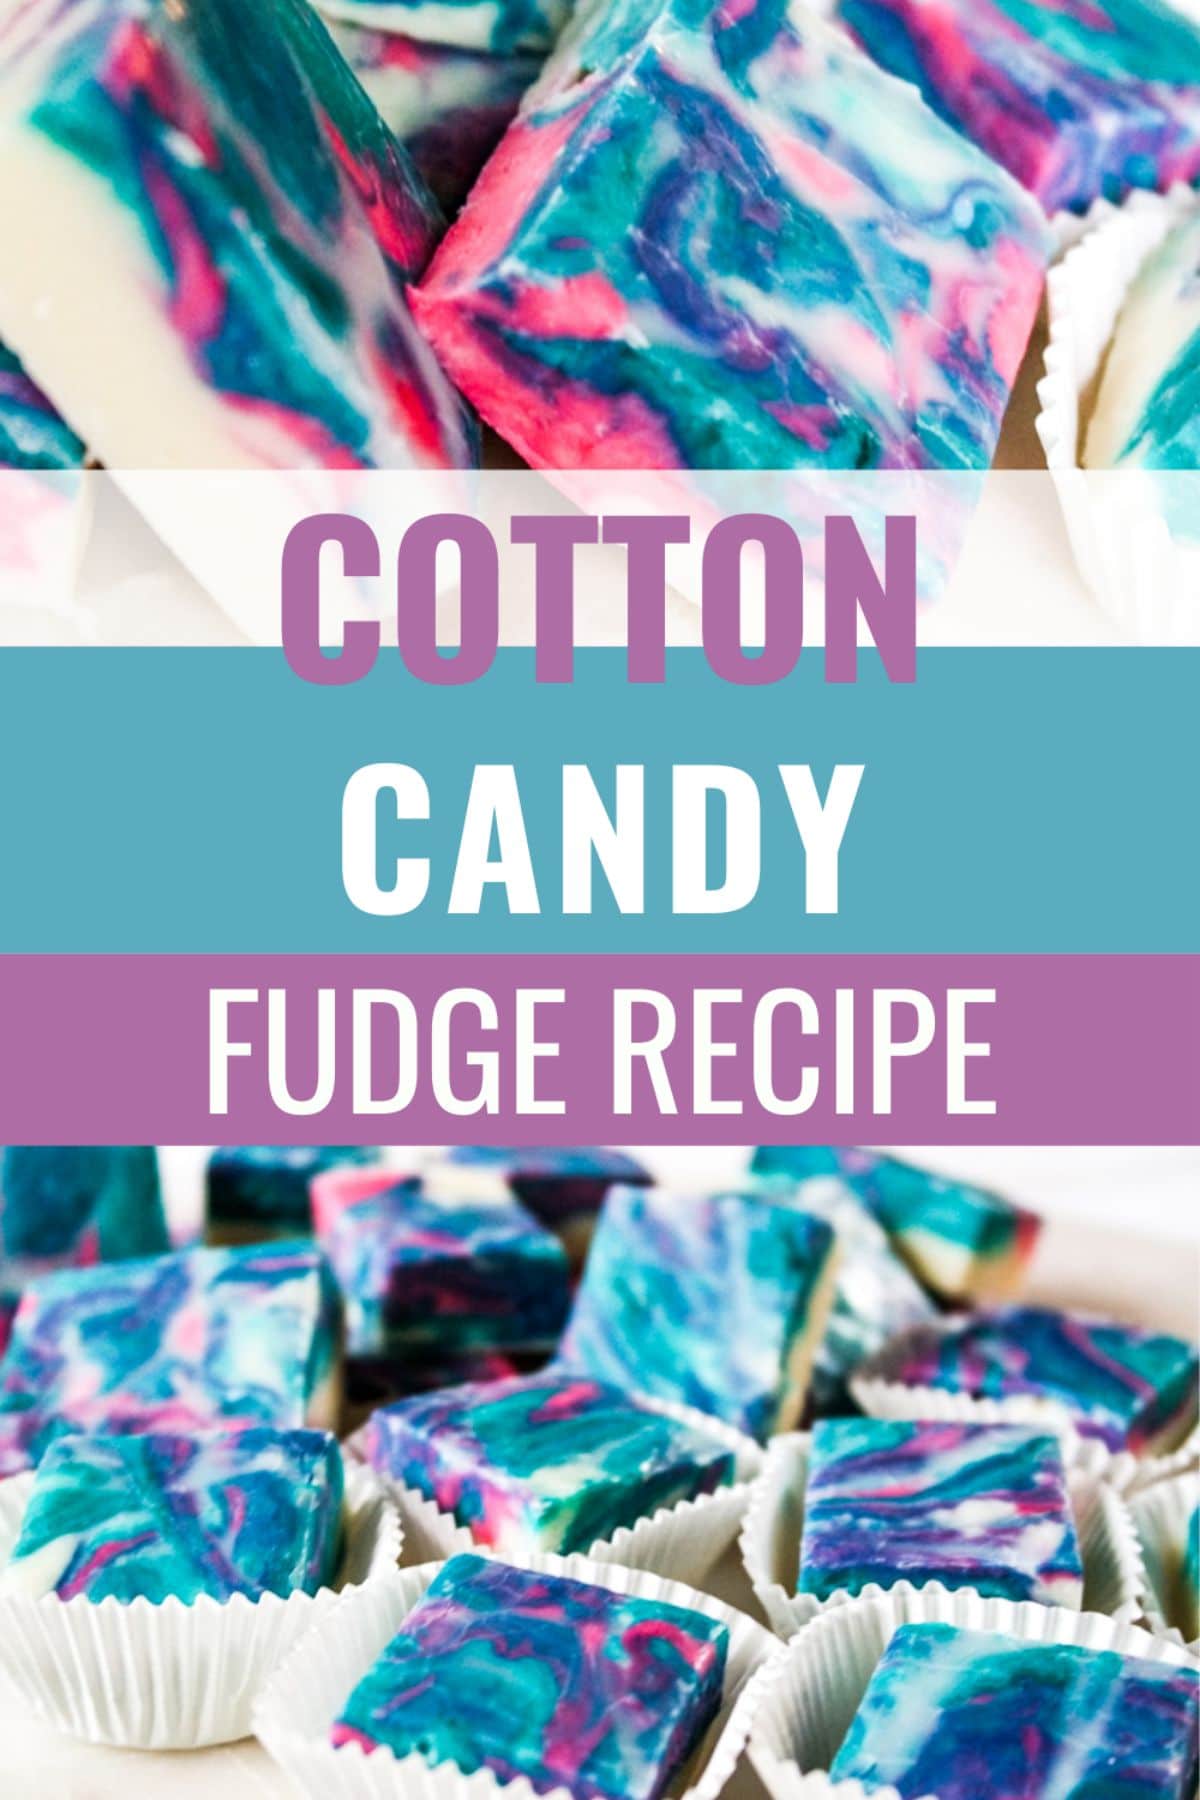 This Cotton Candy Fudge is like nothing you’ve ever tasted before. It’s sweet, decadent, and whimsical; the perfect treat for any occasion. #cottoncandyfudge #cottoncandy #fudge #dessert #recipe via @wondermomwannab